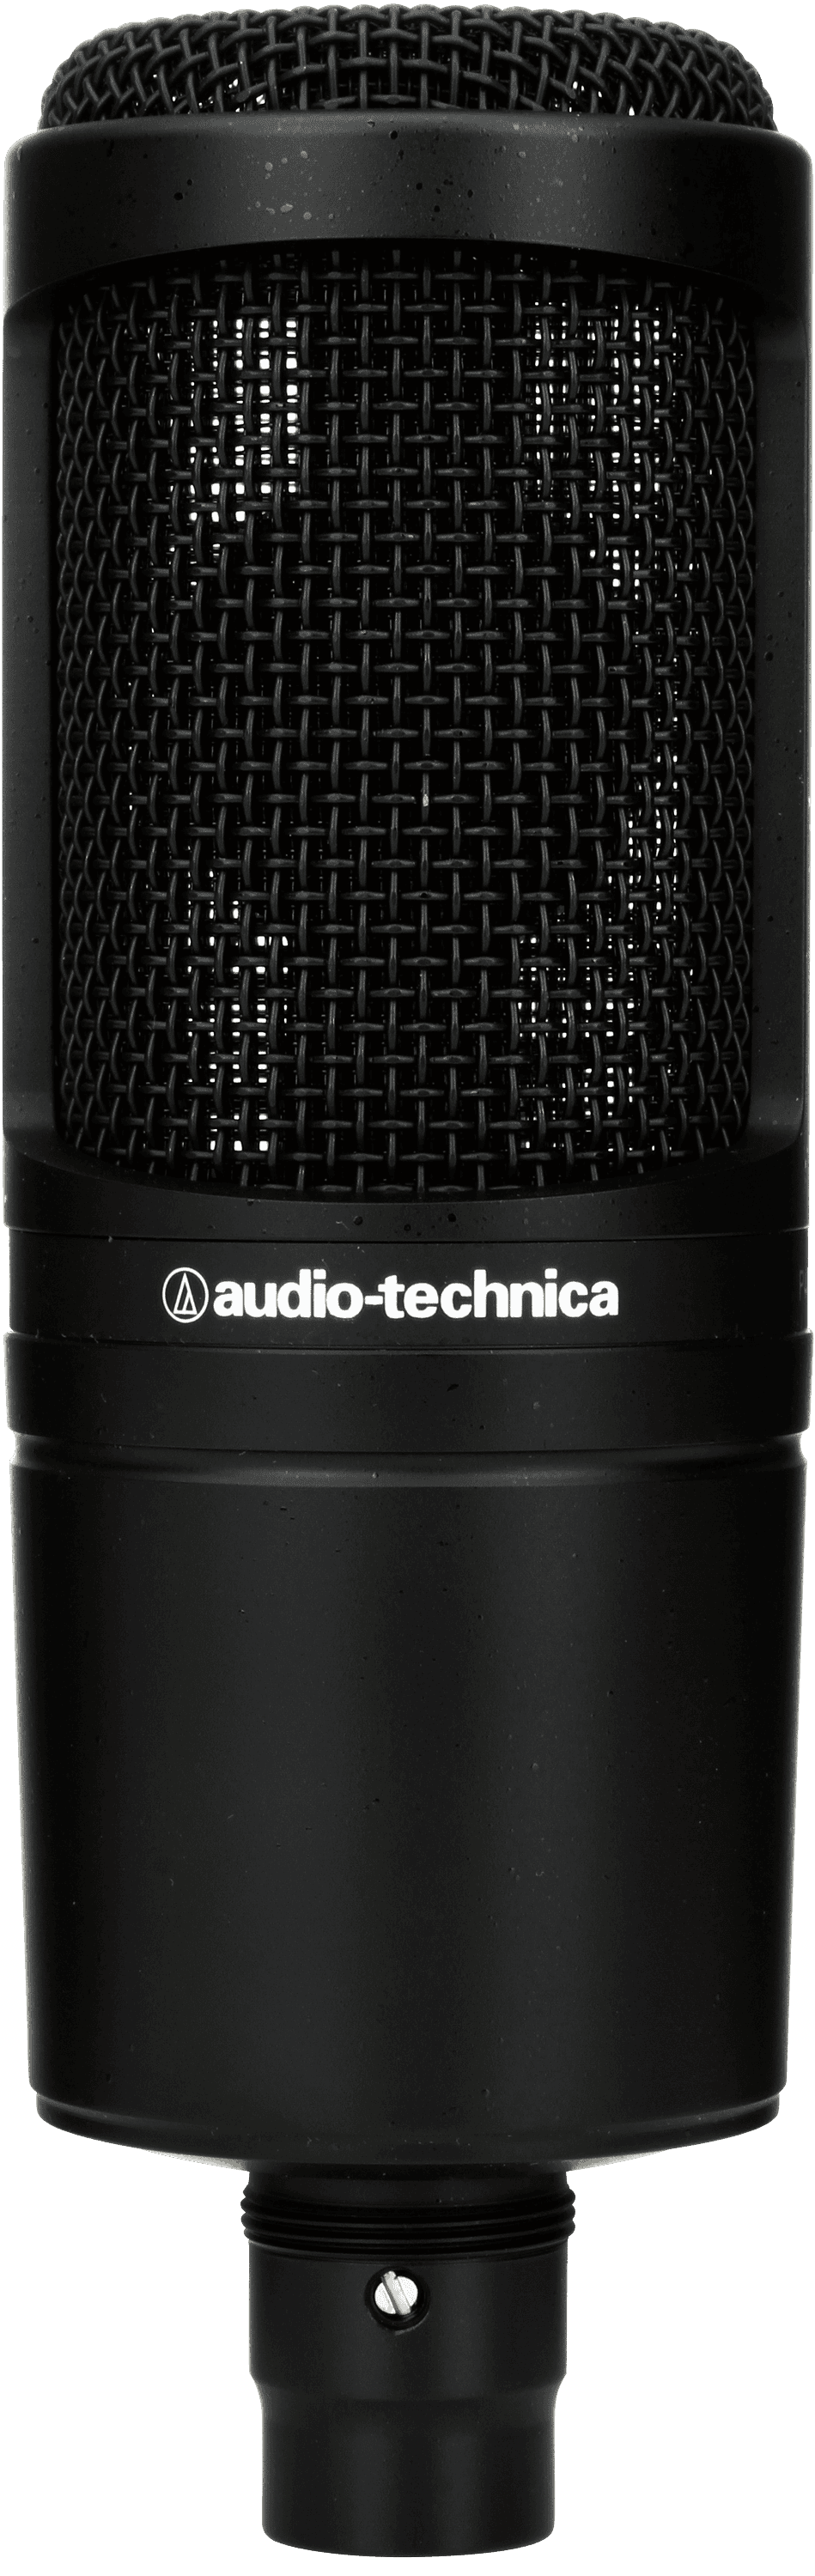 Audio-Technica AT2020 Side-Address Condenser Microphone - AT-2020 Mic